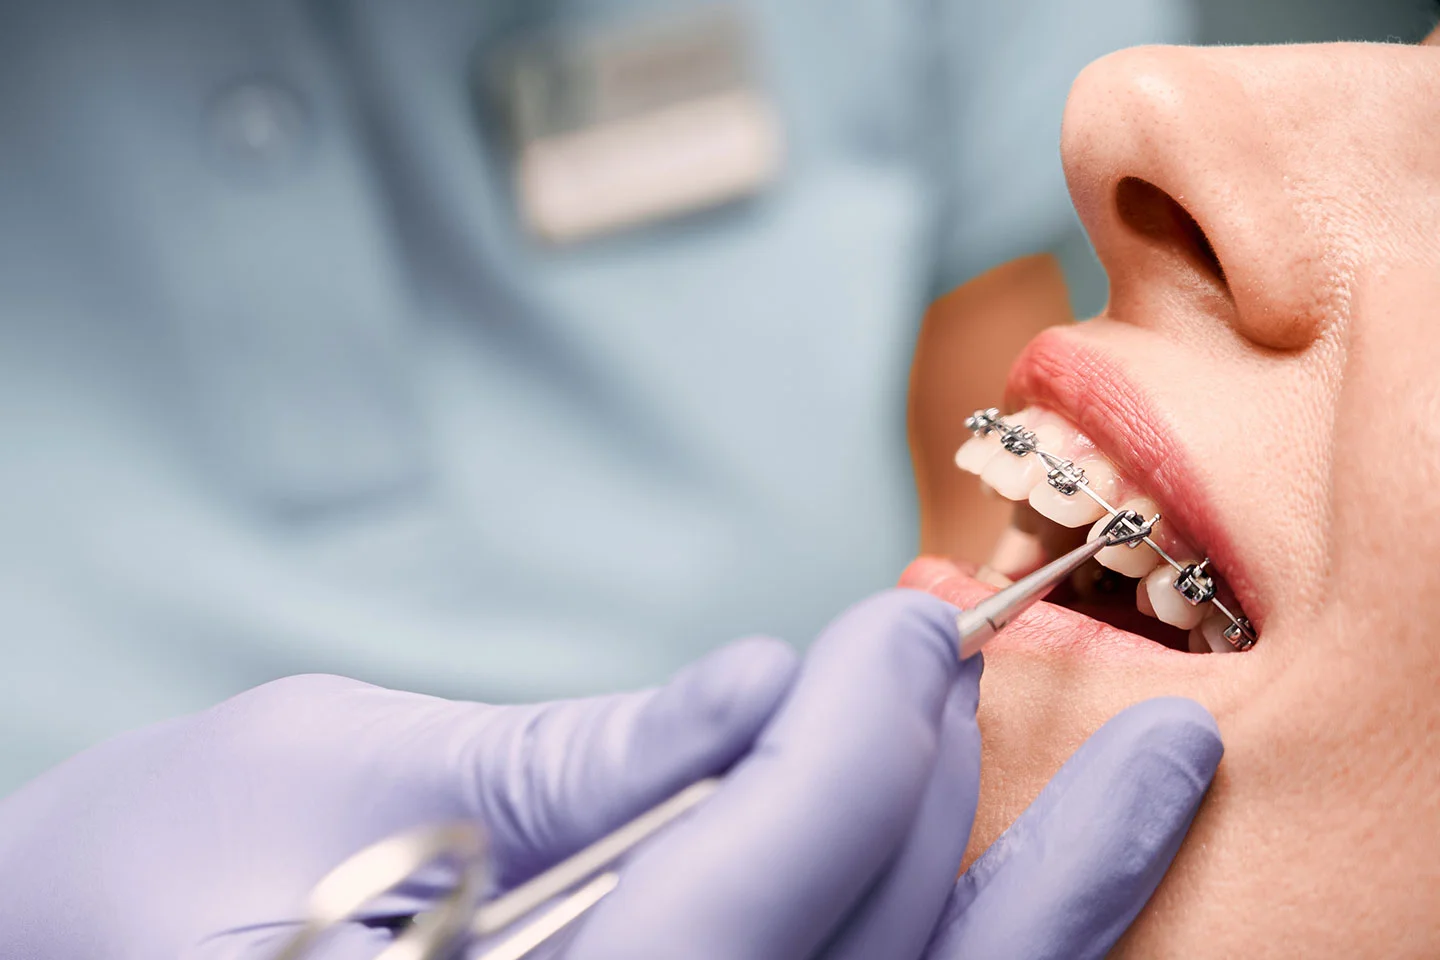 What Are The Benefits Of Orthodontic Treatment?